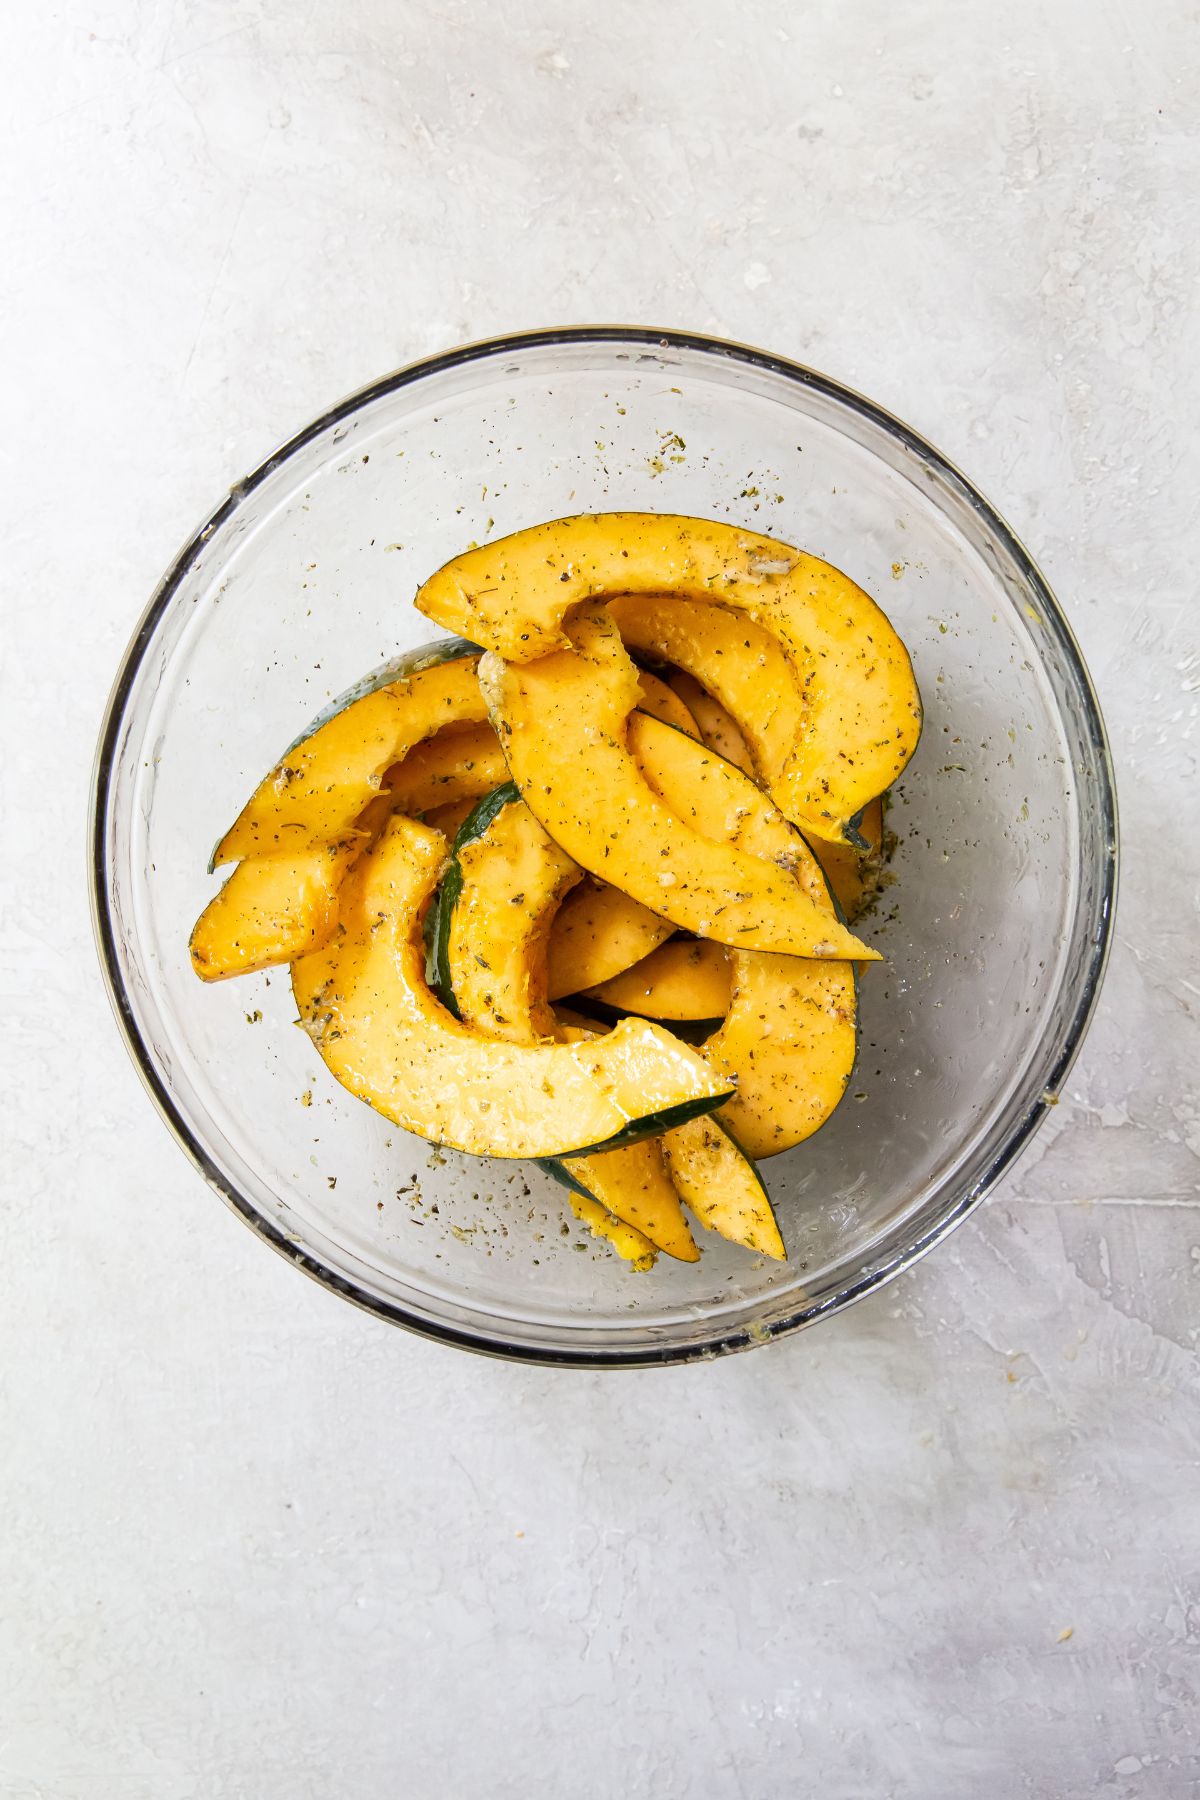 Acorn squash coated in oil and spices in a glass bowl on a white tabletop